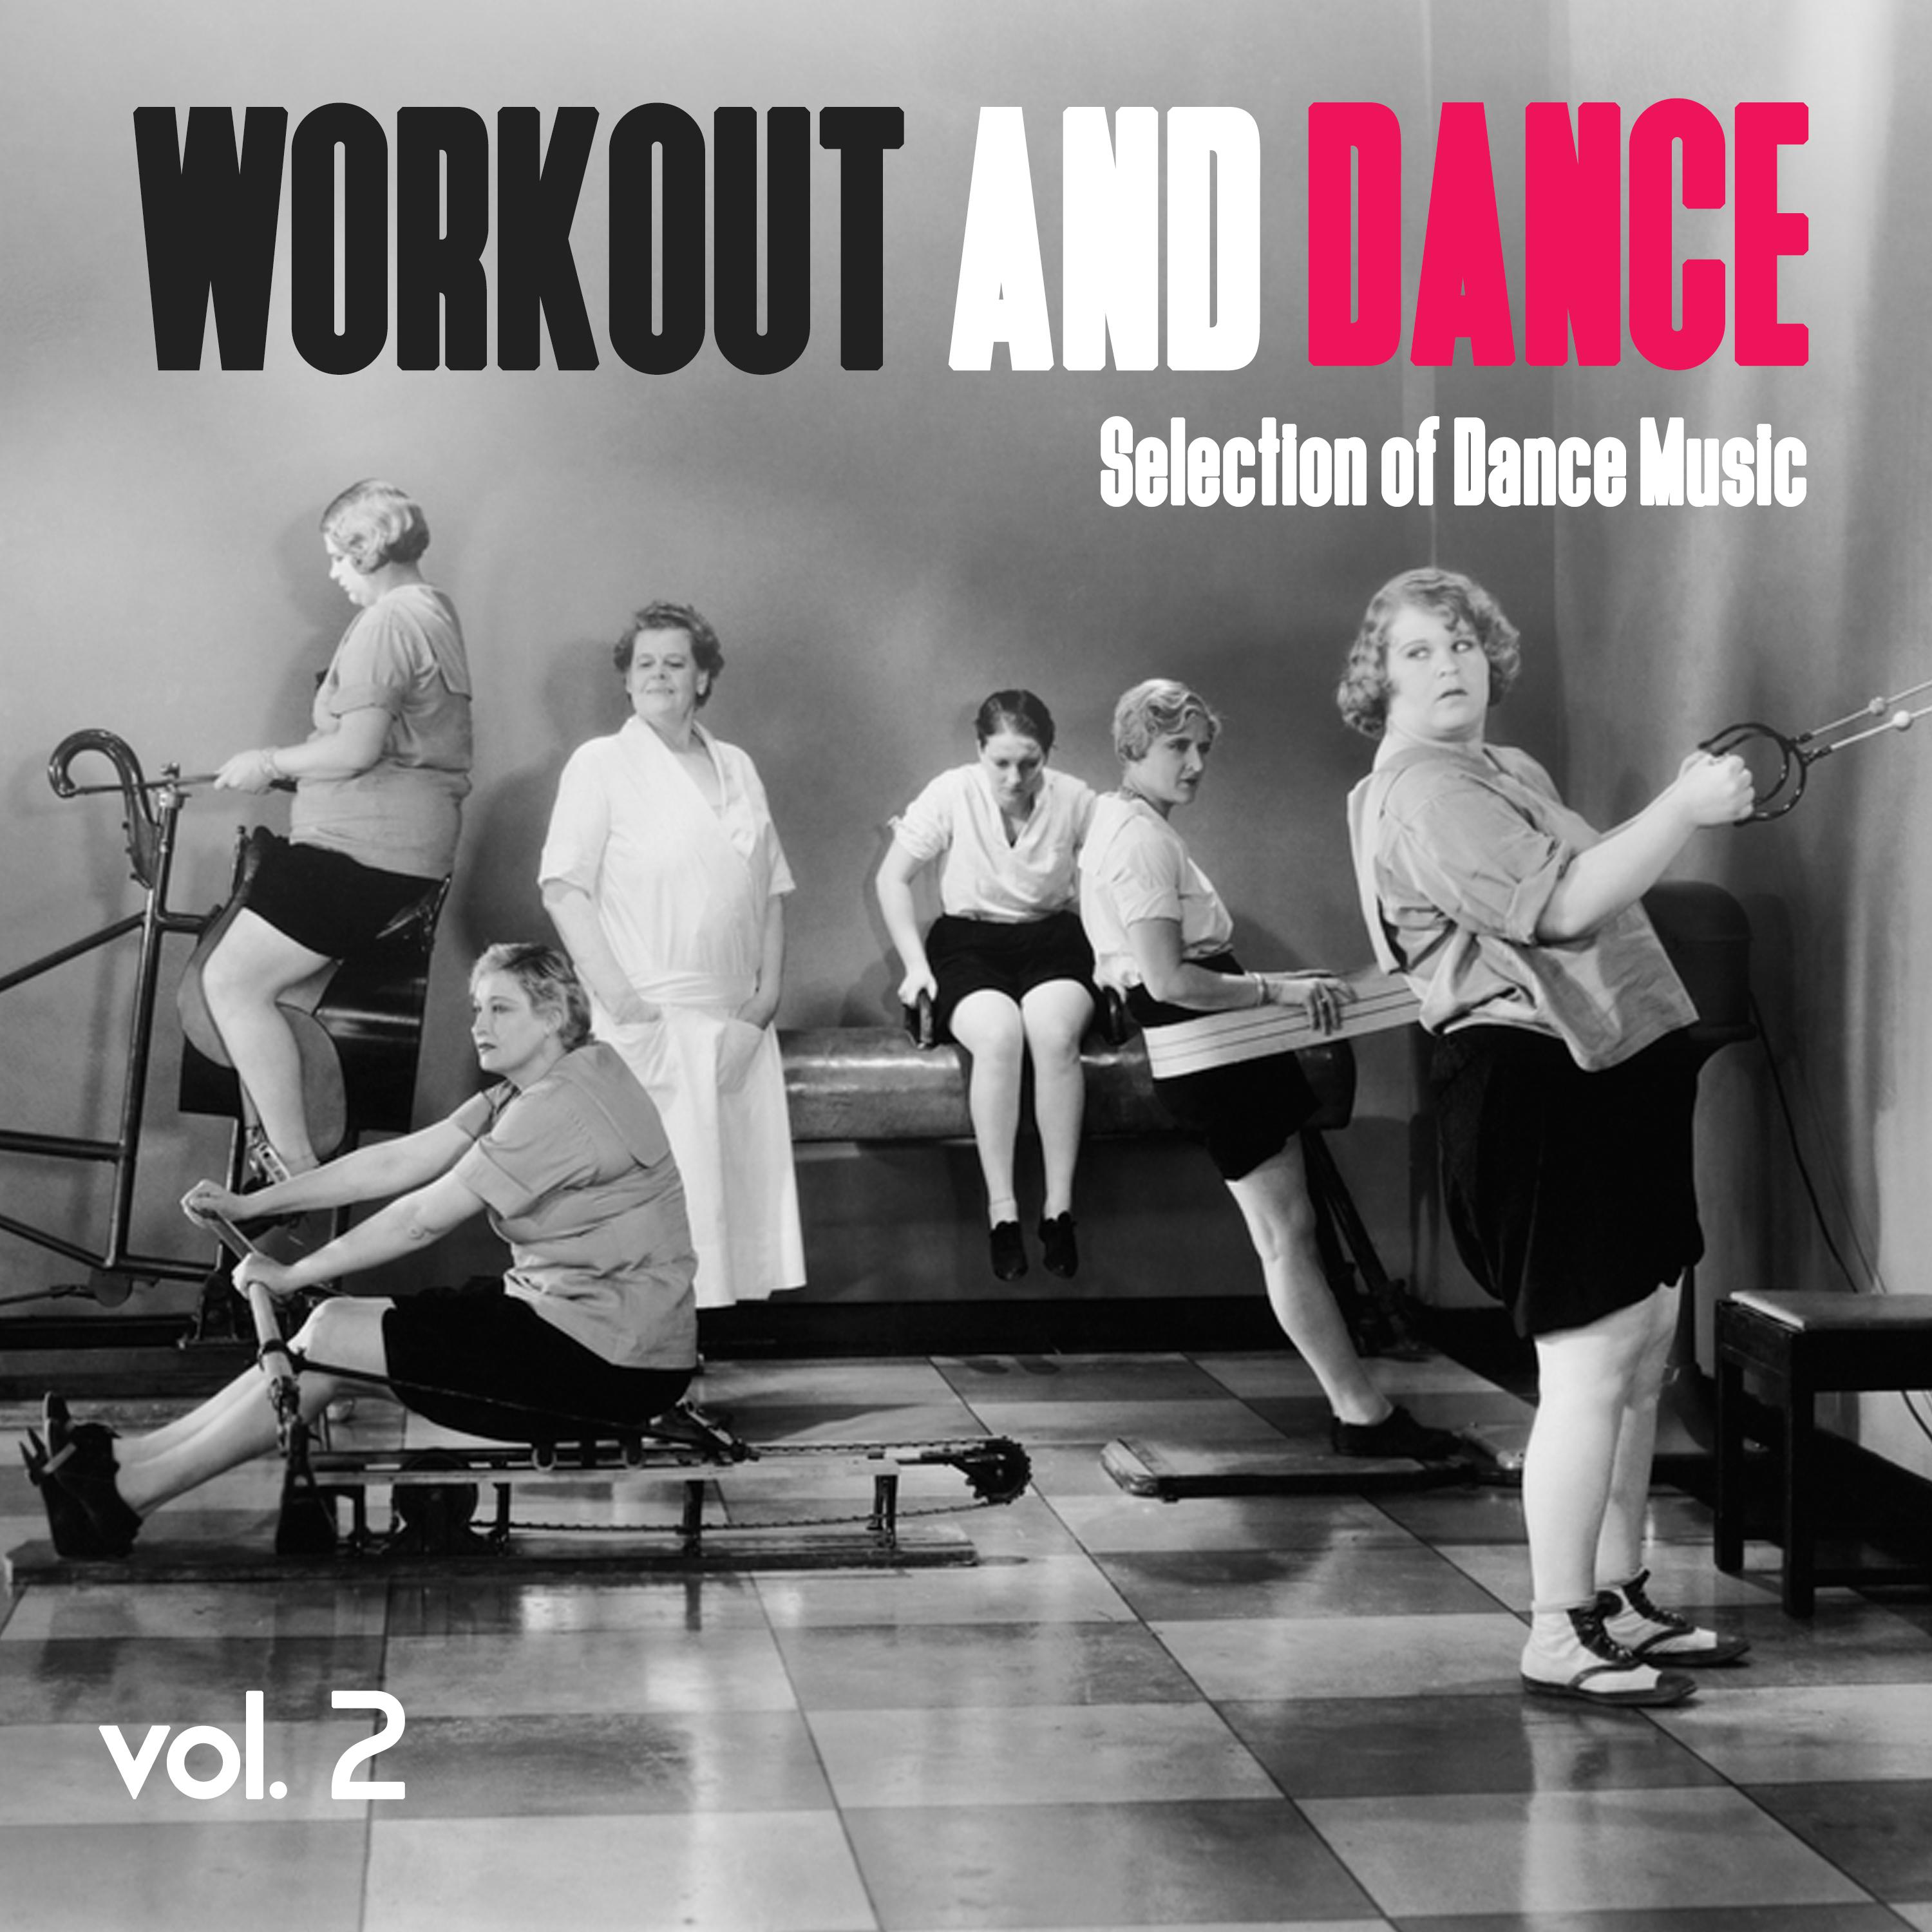 Workout and Dance, Vol. 2 - Selection of Dance Music